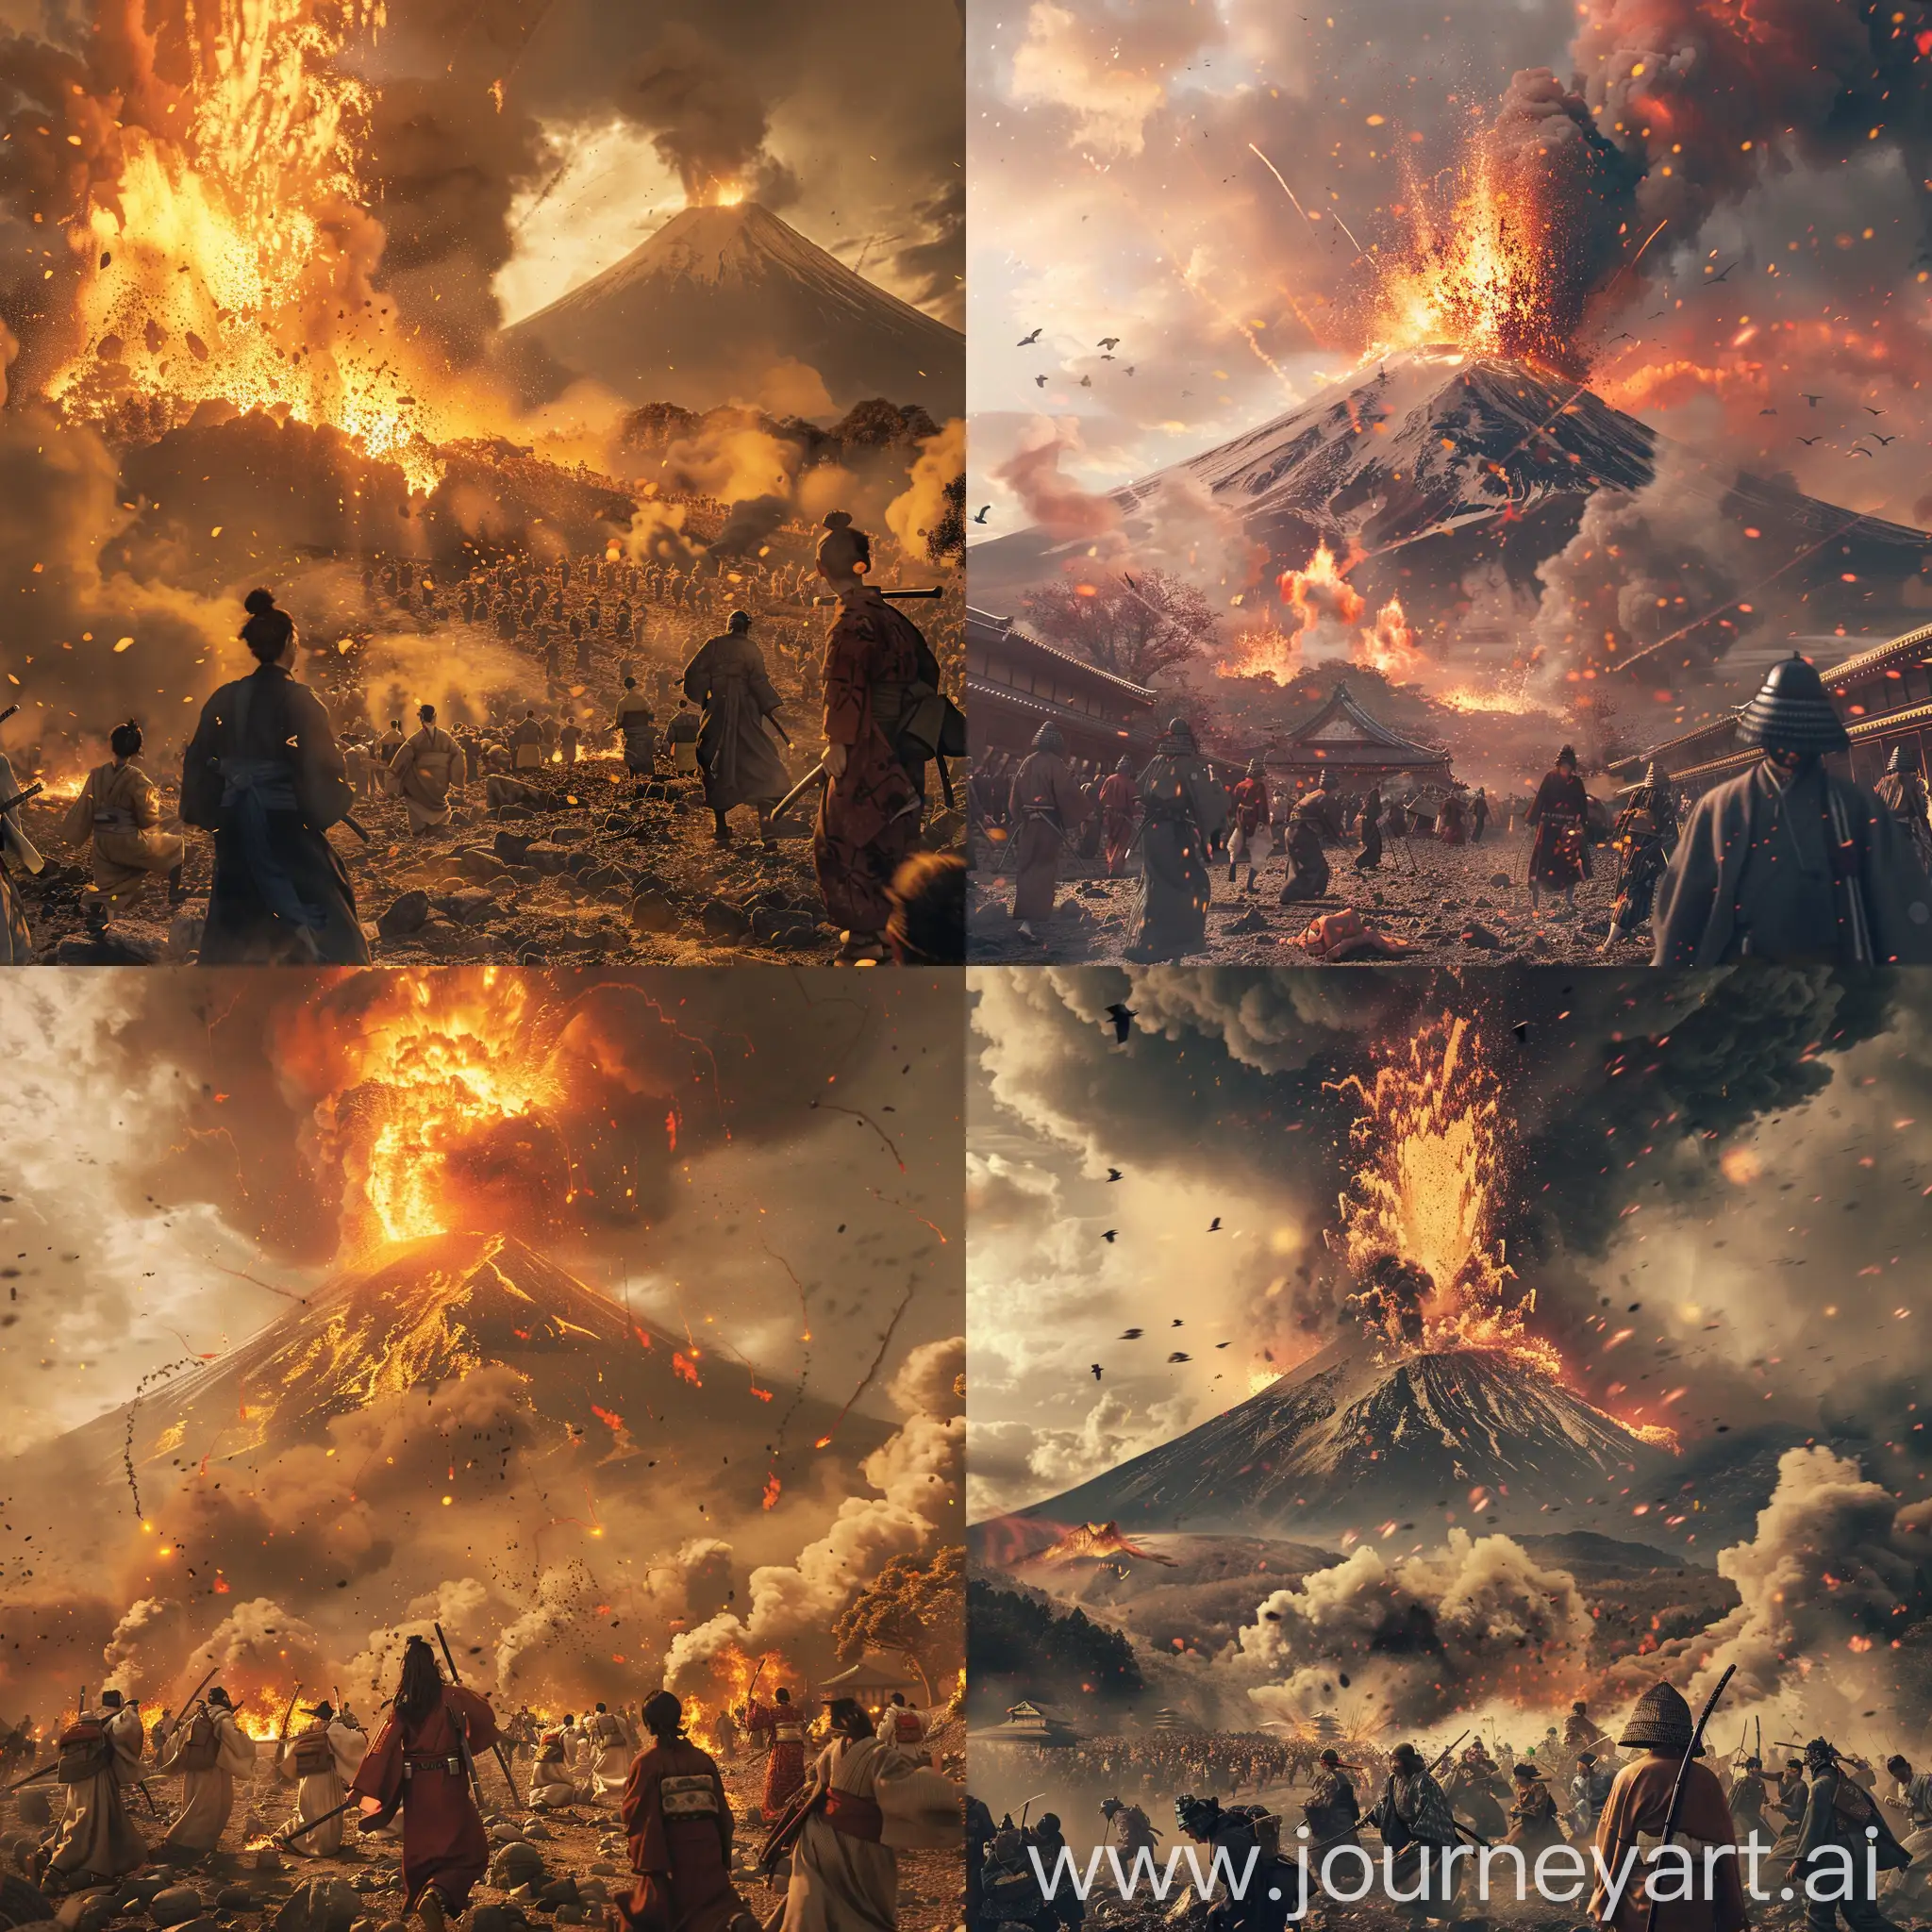 Epic-Mount-Fuji-Eruption-with-Ninjas-and-Civilians-Amidst-Chaos